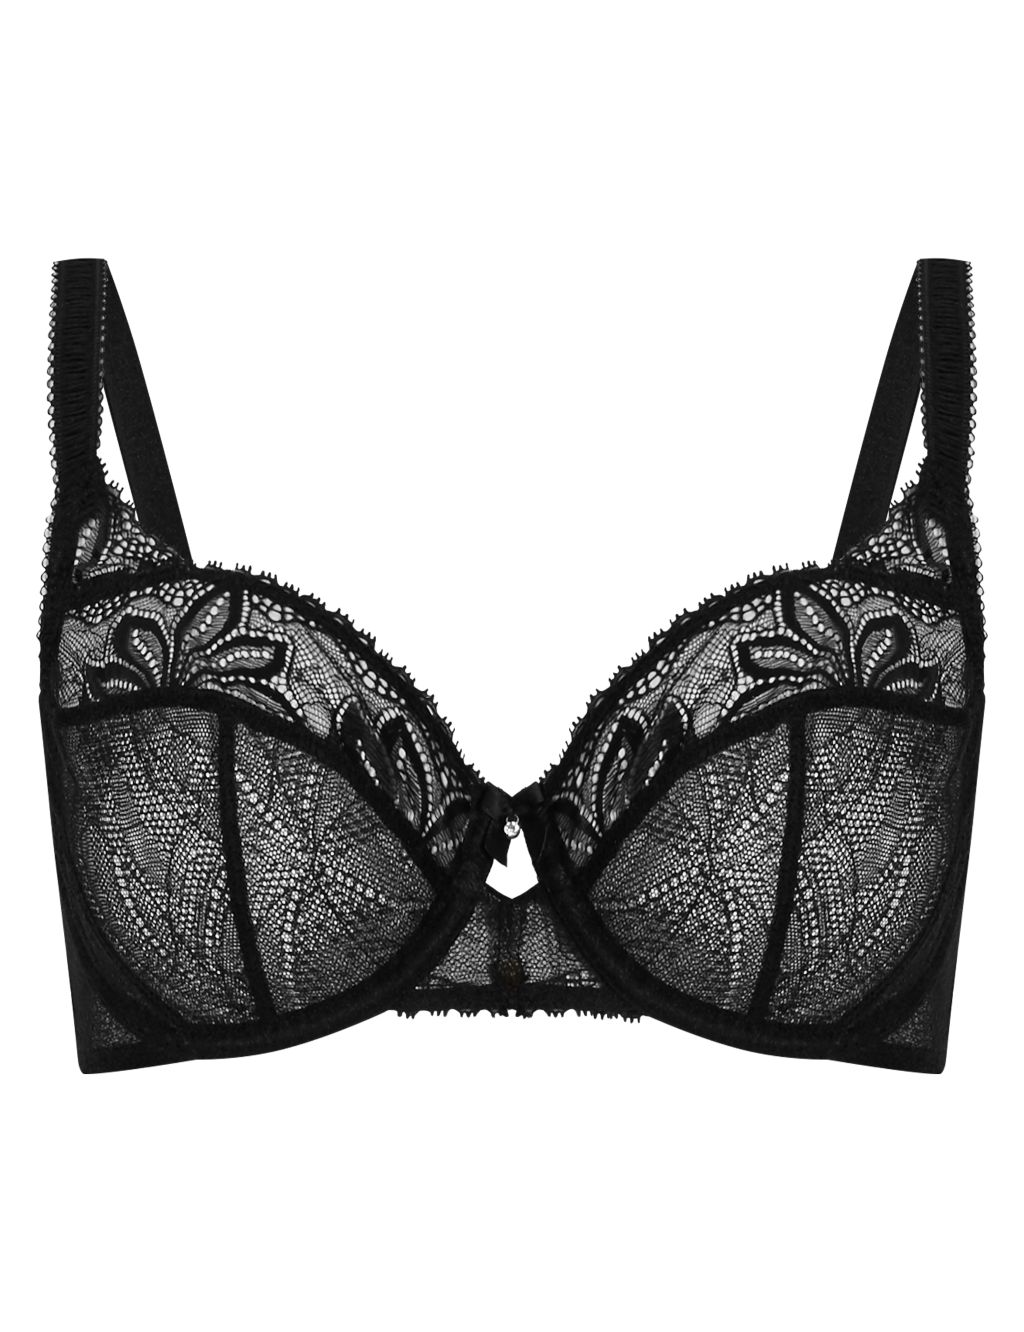 Arelia Lace Non-Padded Underwired Full Cup Bra A-DD | M&S Collection | M&S